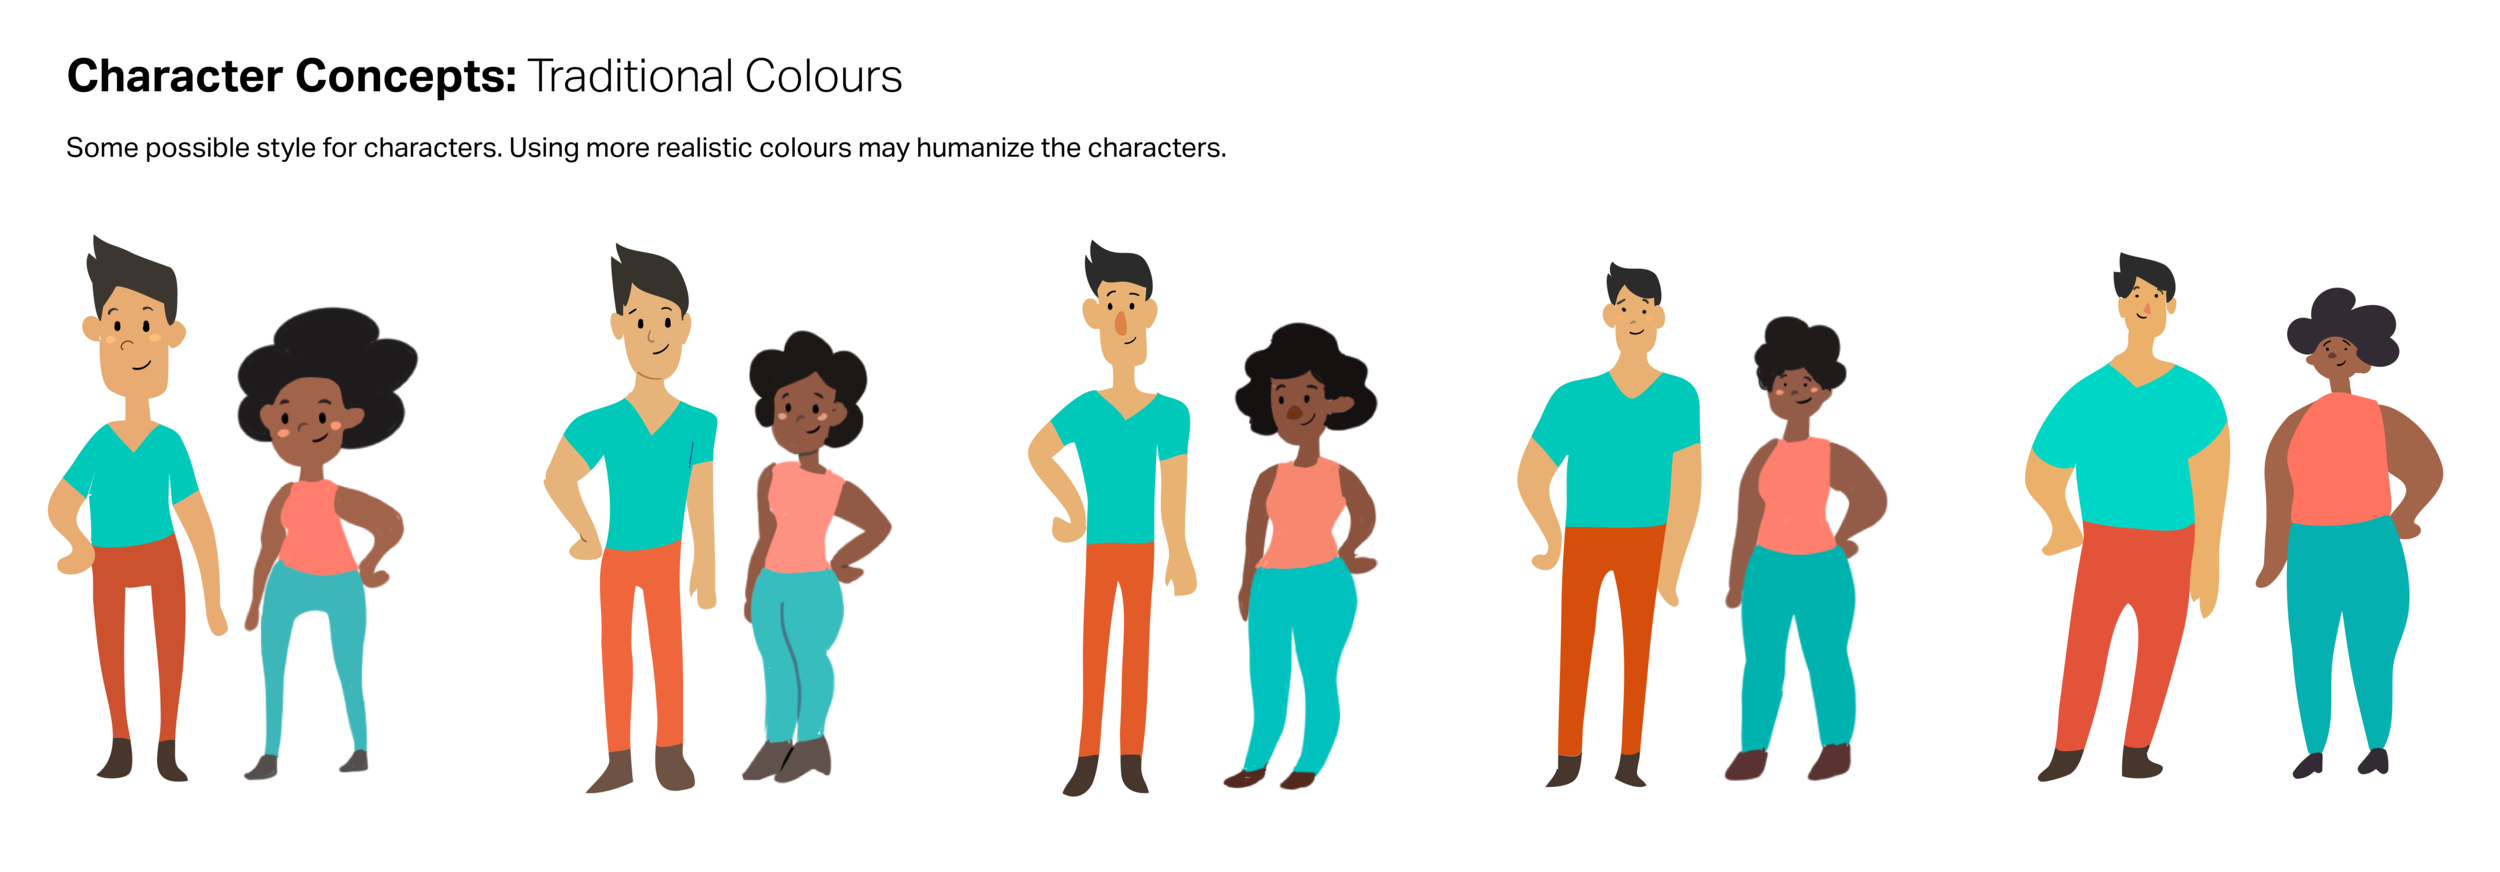 character concepts all colours-01.png